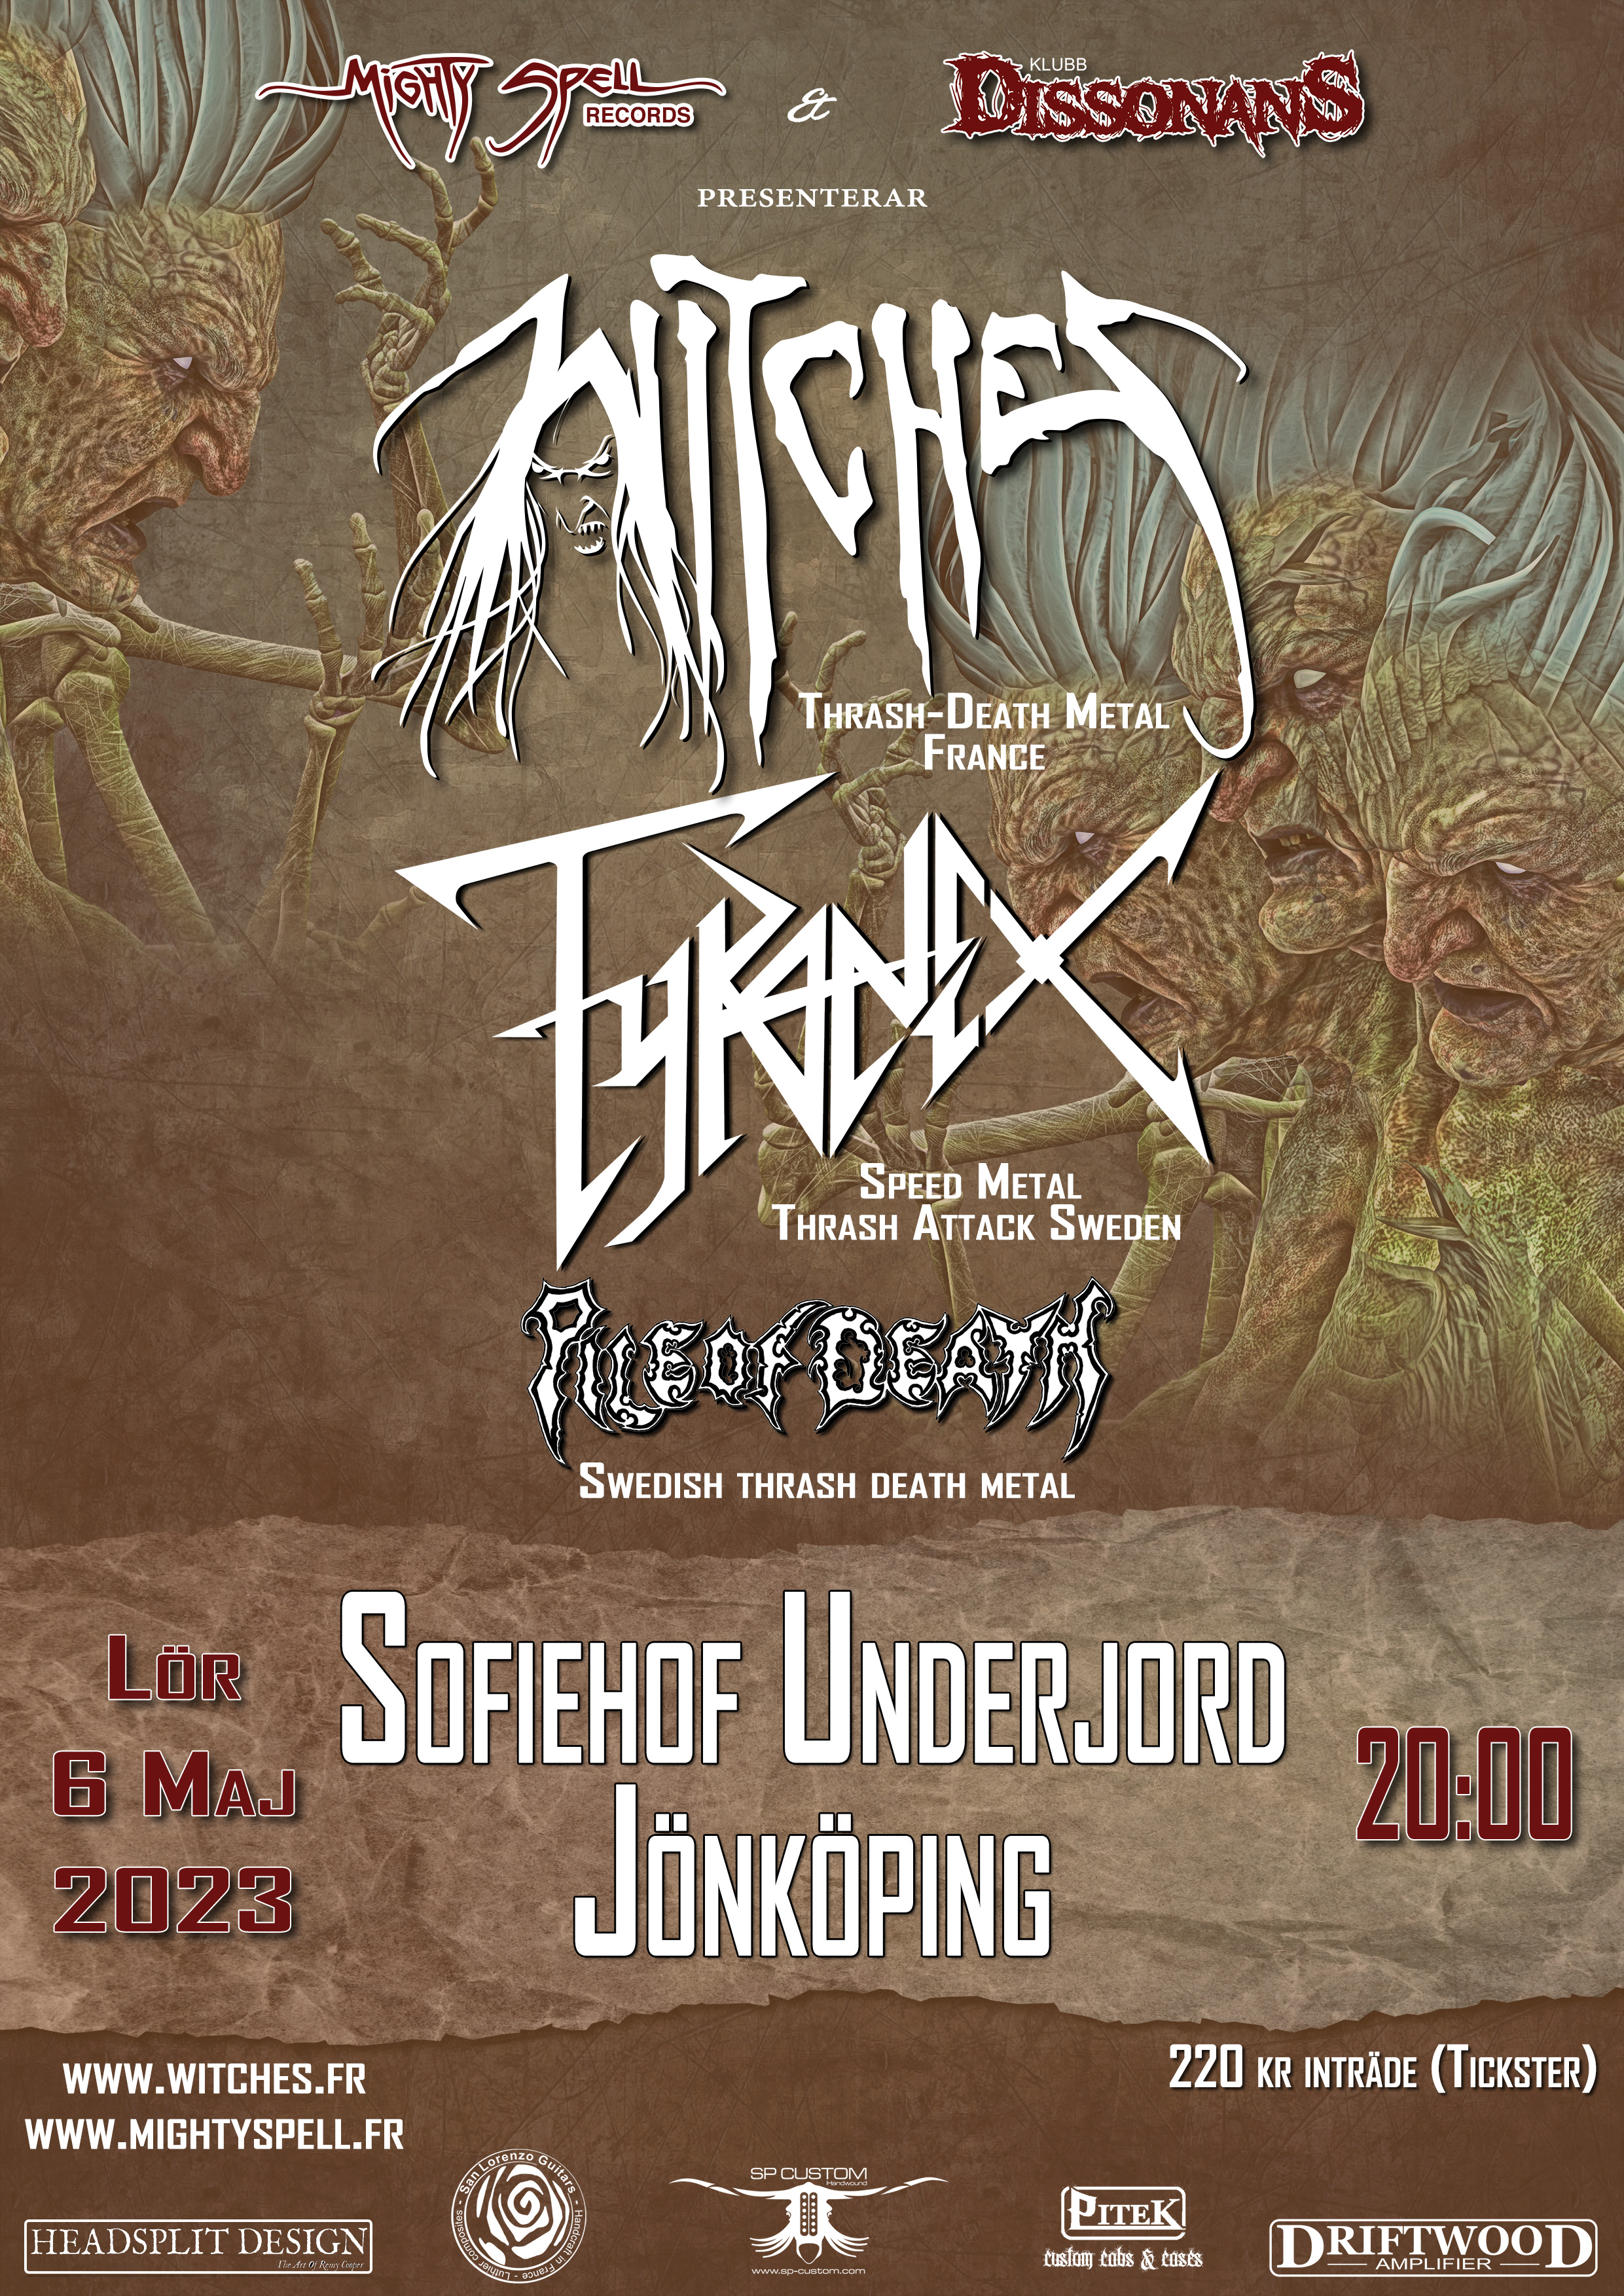 Witches flyer Witches + Tyranex + Pile of Death @ Klubb Dissonnans Sofiehof Underjord Jnkping, Sweden